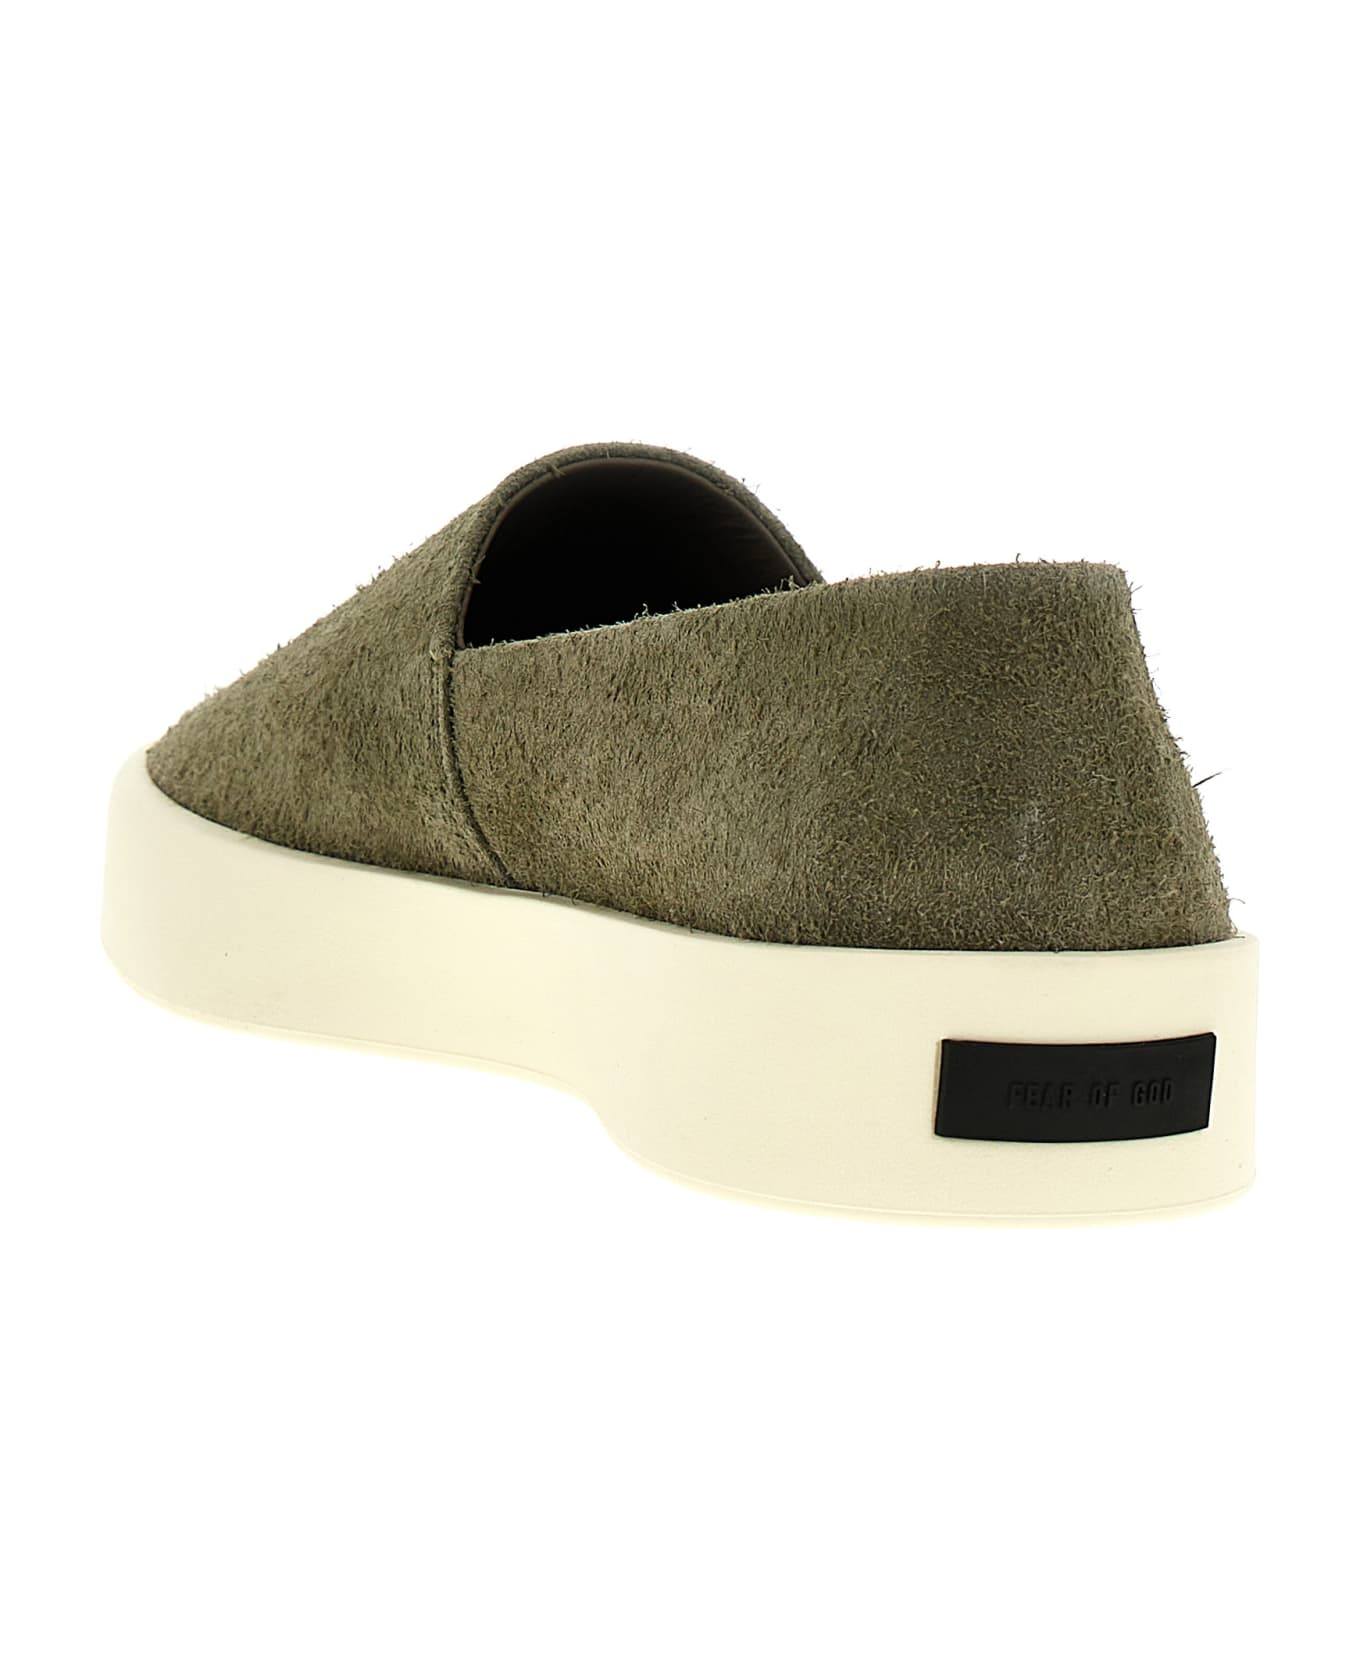 Fear of God 'espadrille' Sneakers - Green スニーカー